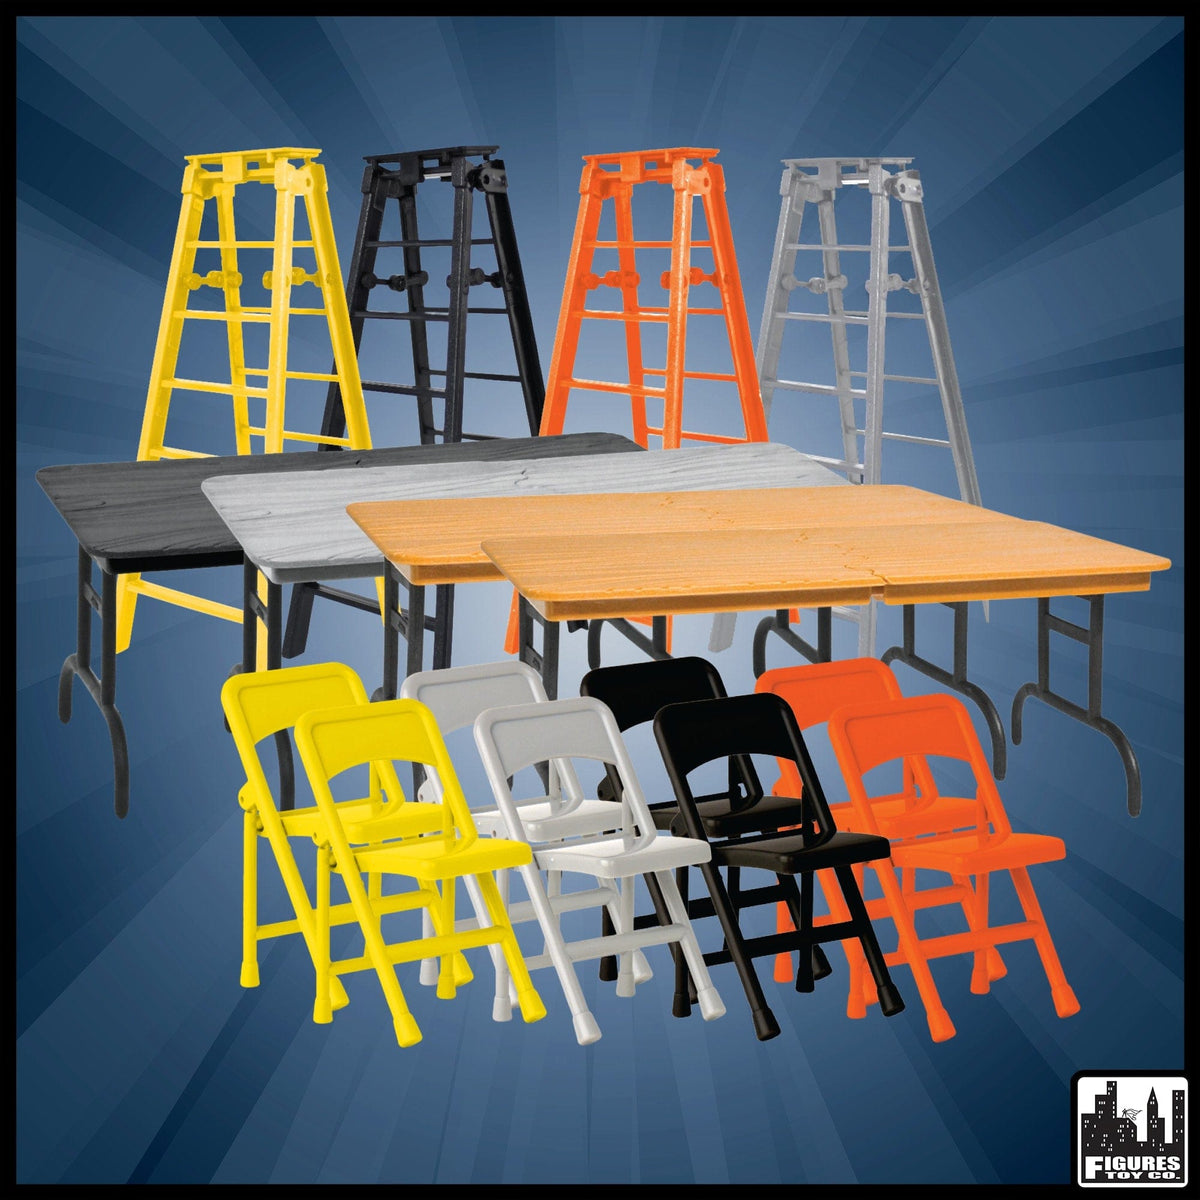 Complete Set of all 4 Ultimate Ladder, Table and Chairs Playsets for WWE Wrestling Action Figures